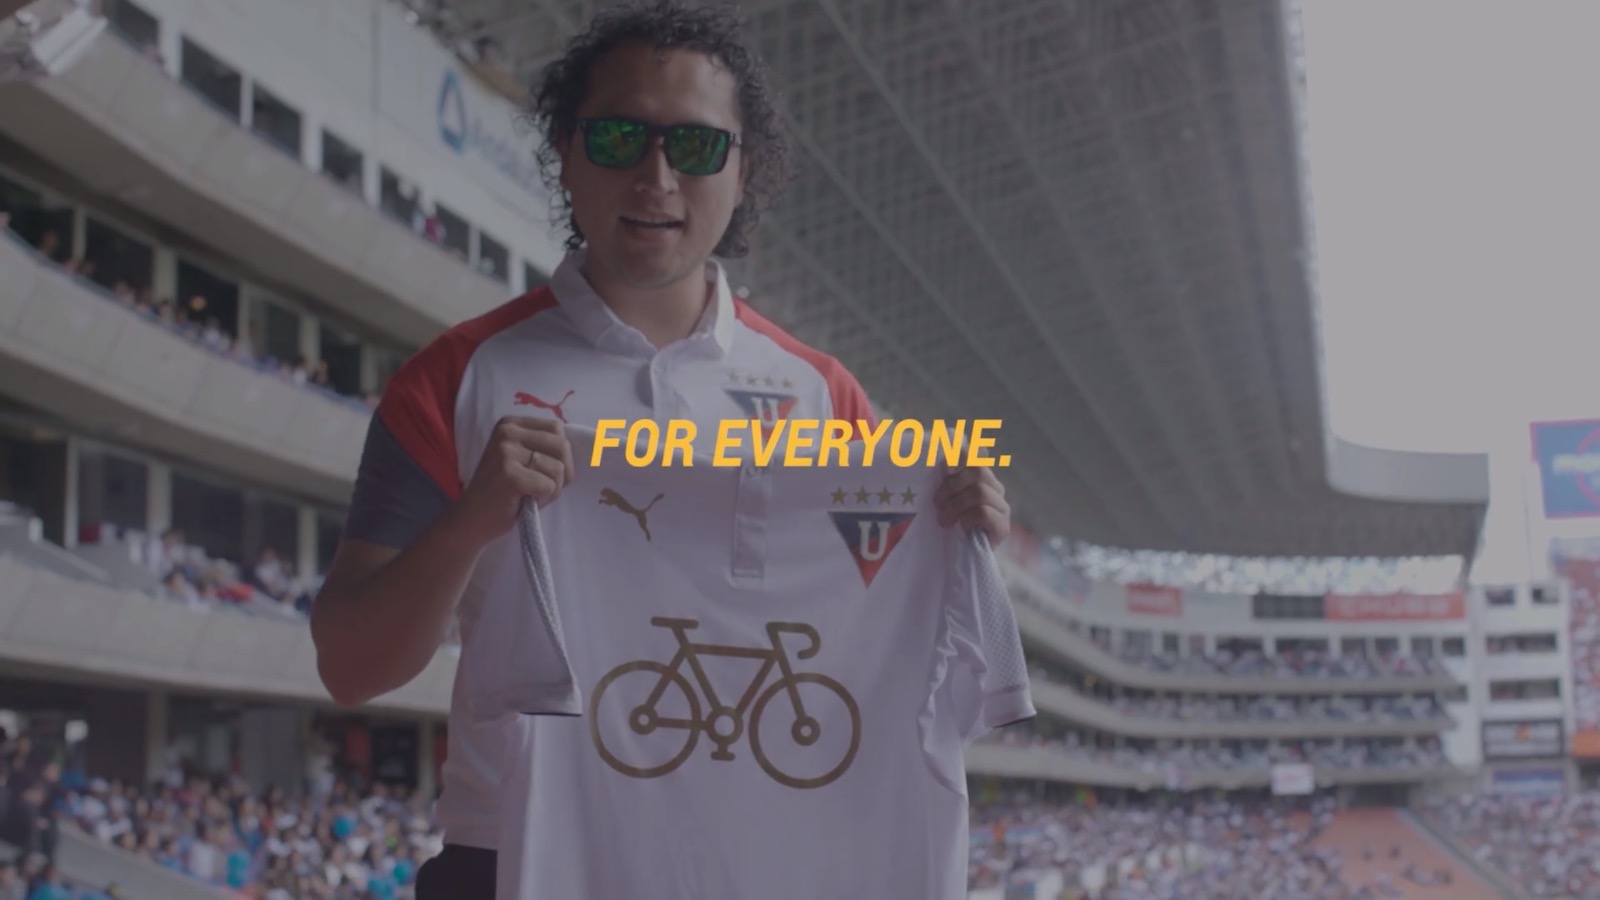 Chevy Gives up Its Logo on Famous Jerseys to Promote Cycling